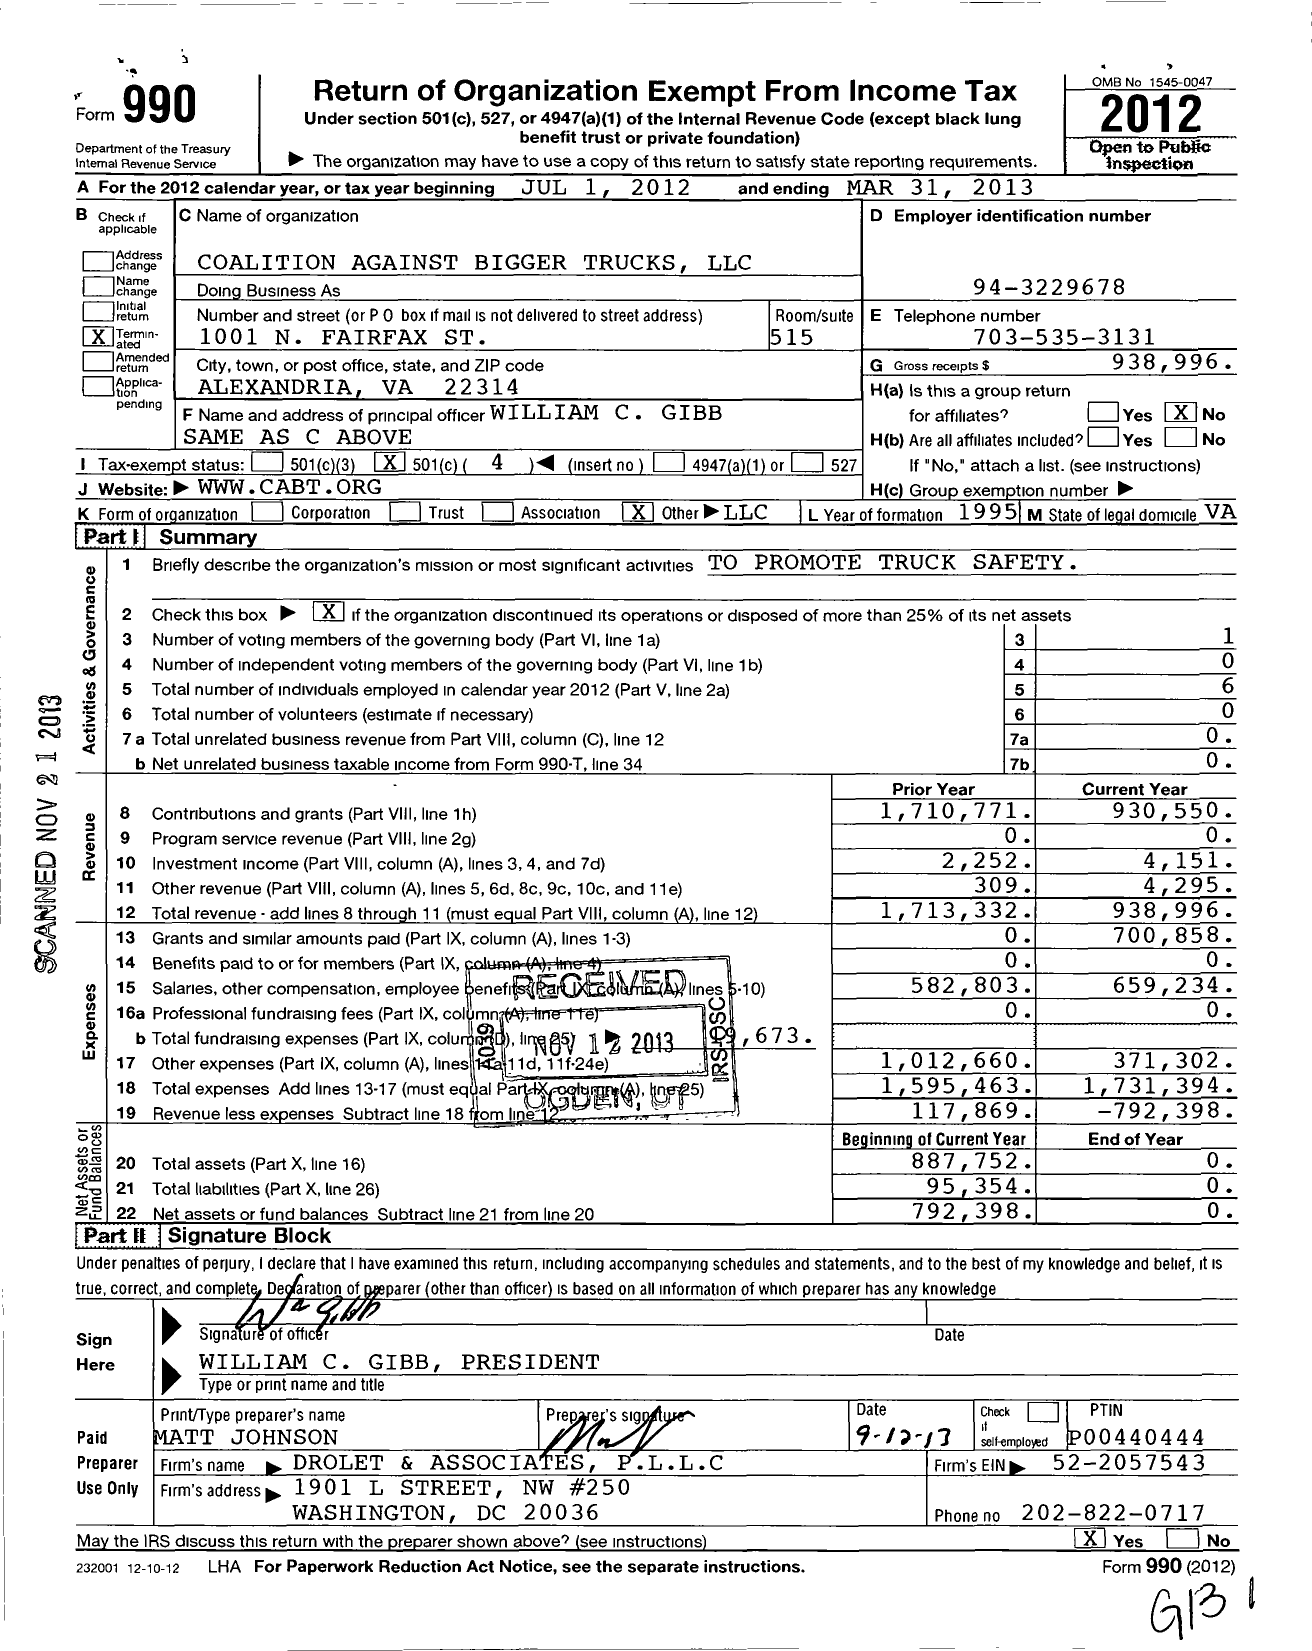 Image of first page of 2012 Form 990O for Coalition Against Bigger Trucks LLC